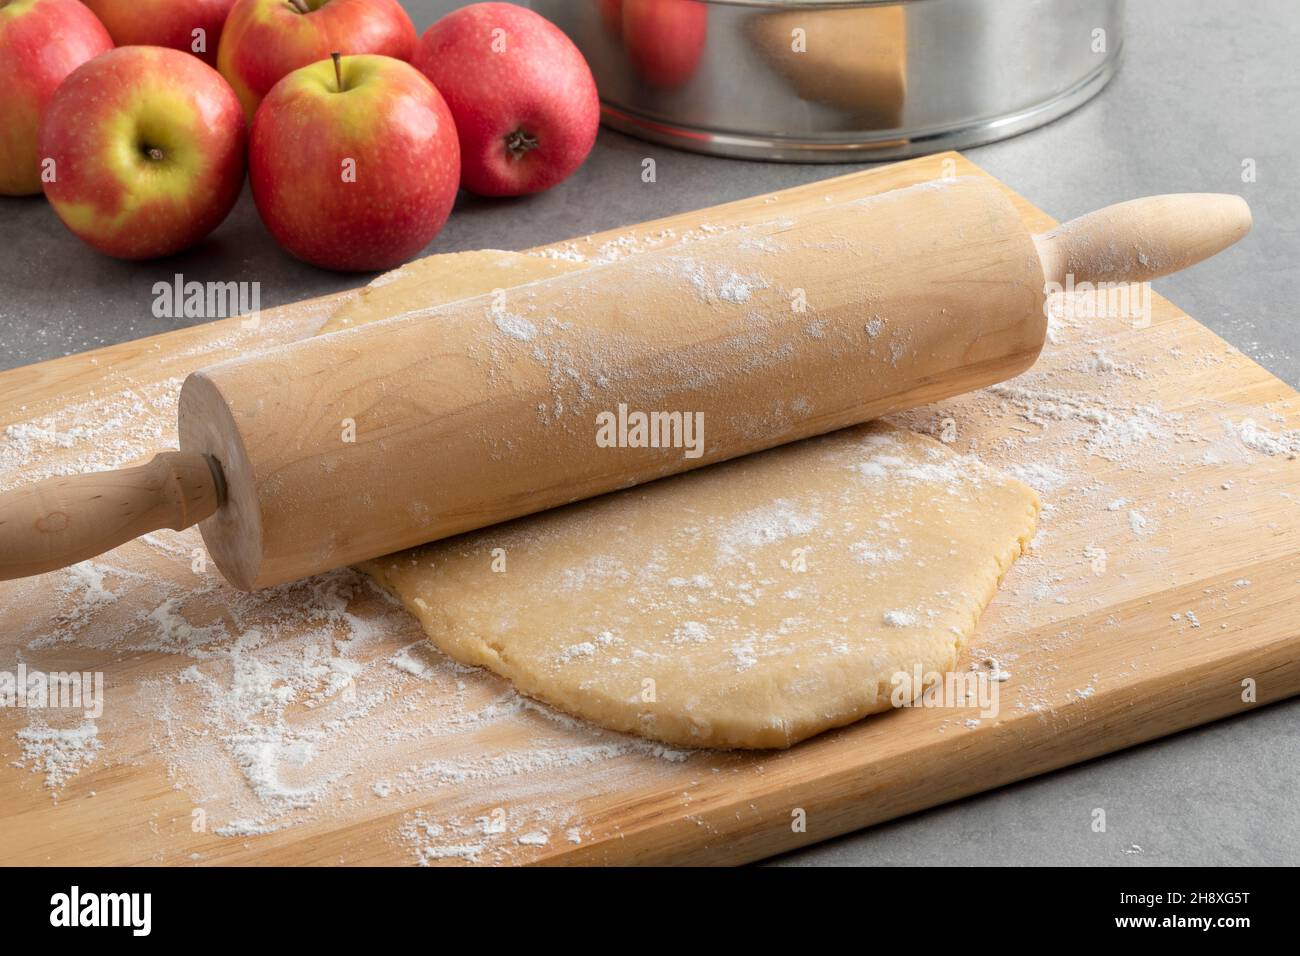 Preparing fresh dough with a wooden rolling pin and flour for baking an apple pie close up Stock Photo